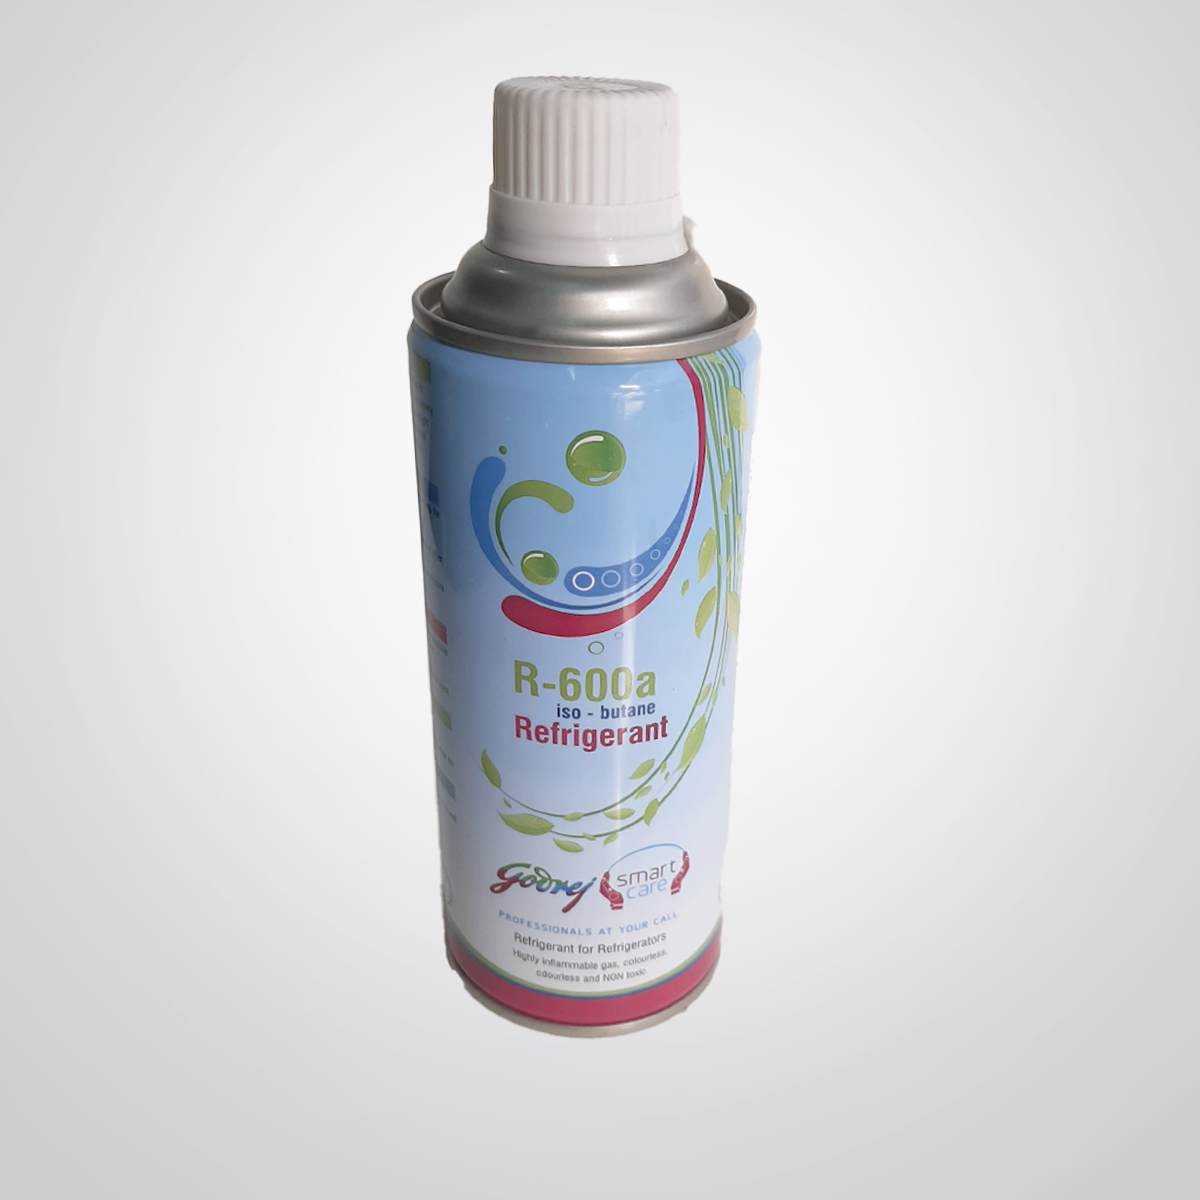 Refrigerant Gas R600a, Packaging Type: Cylinder, Packaging Size